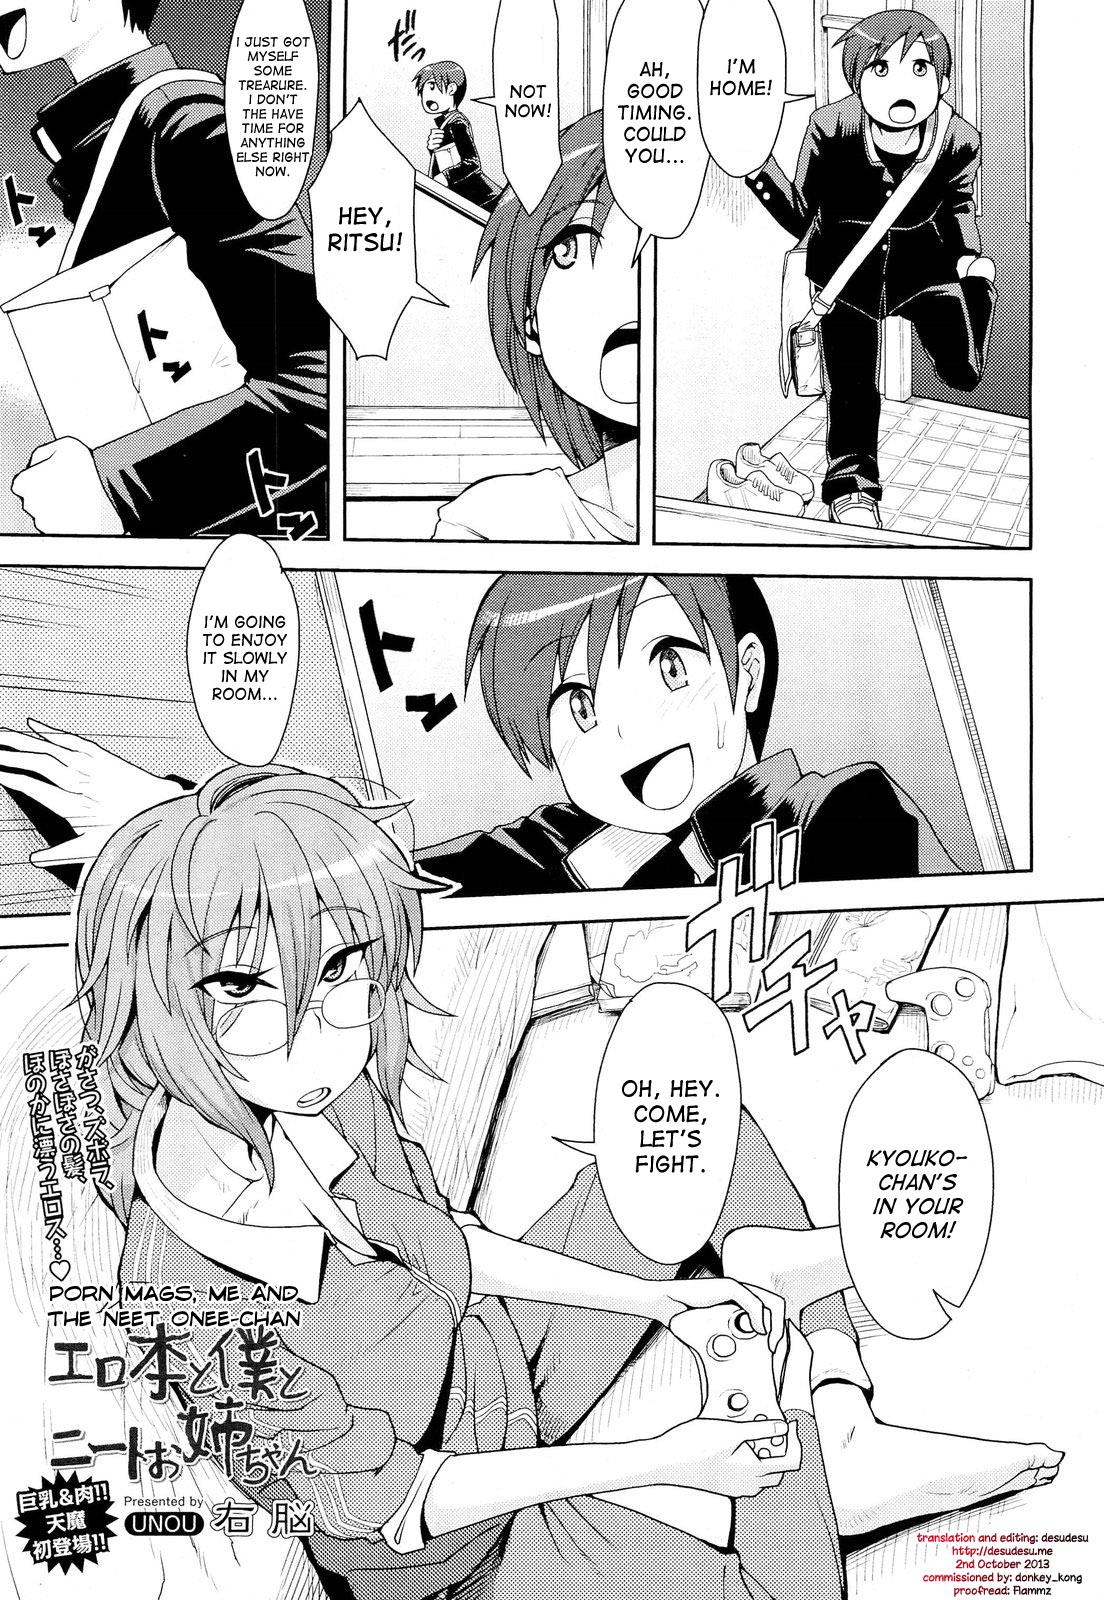 Money Talks [UNOU] Erohon to Boku to NEET Onee-chan | Porn Mags, Me and The NEET Onee-chan (COMIC Tenma 2012-08) [English] [desudesu] Transsexual - Picture 1